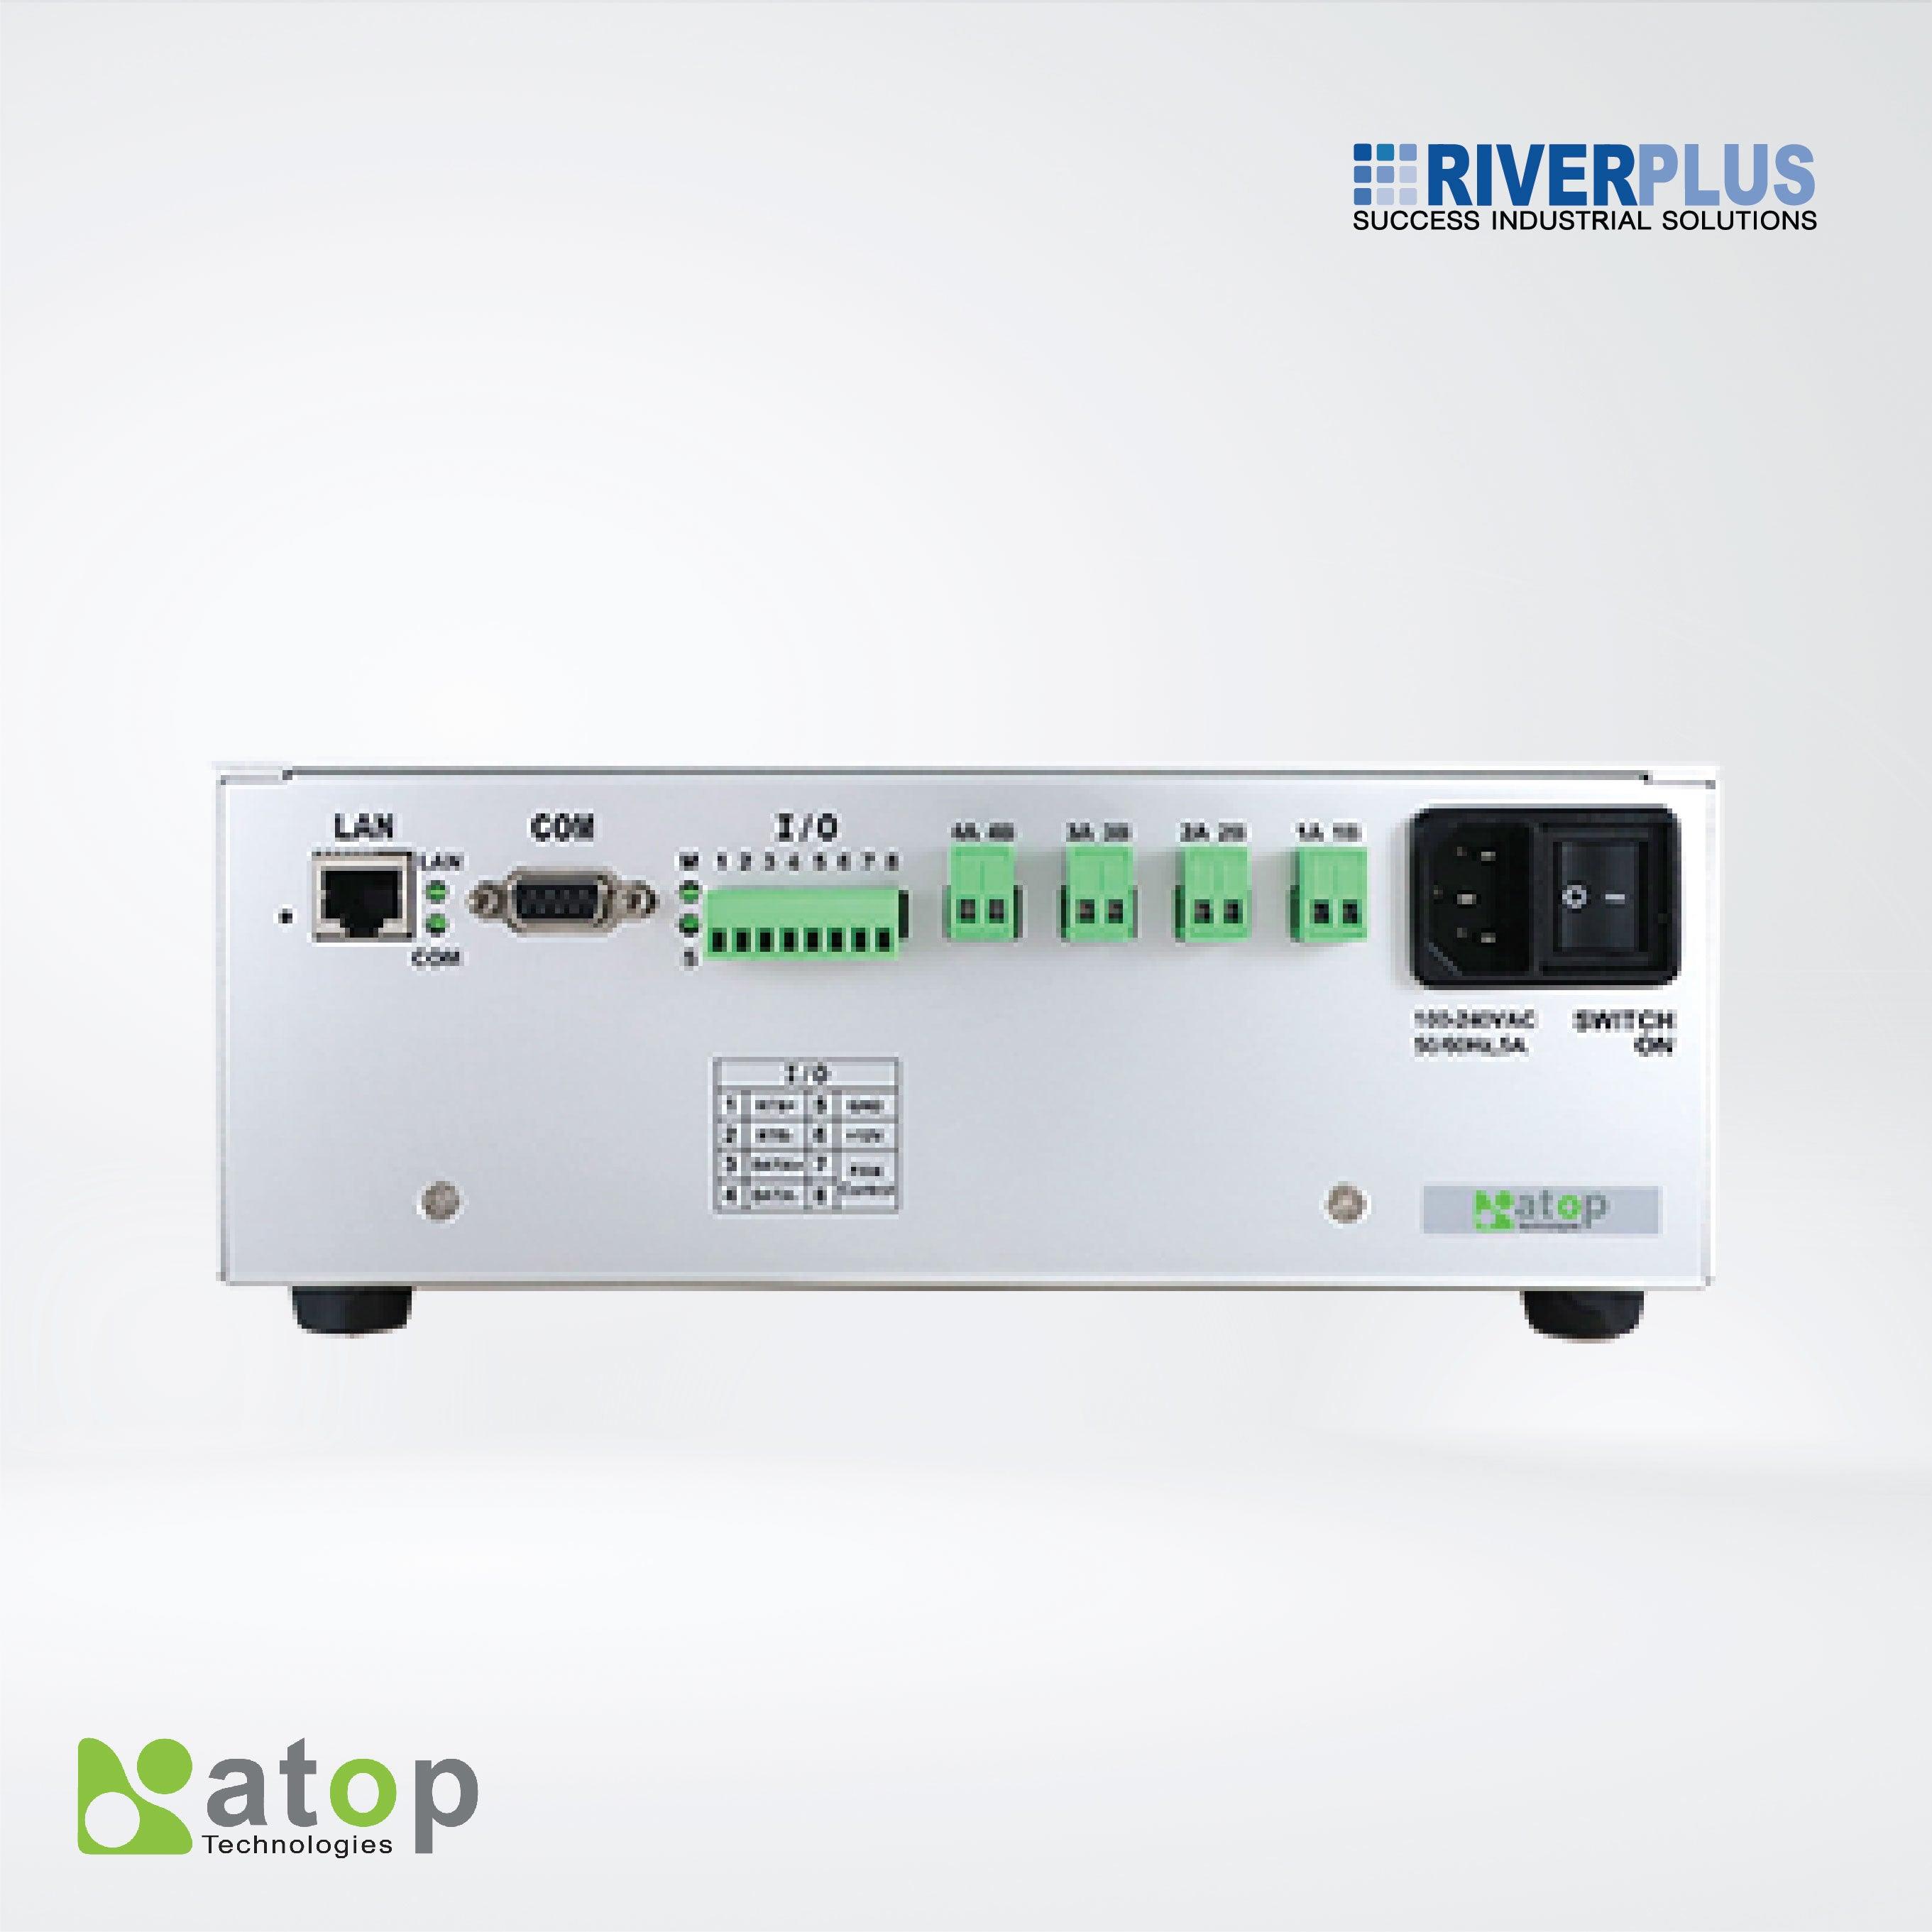 AT500 TCP/IP Controller - Riverplus